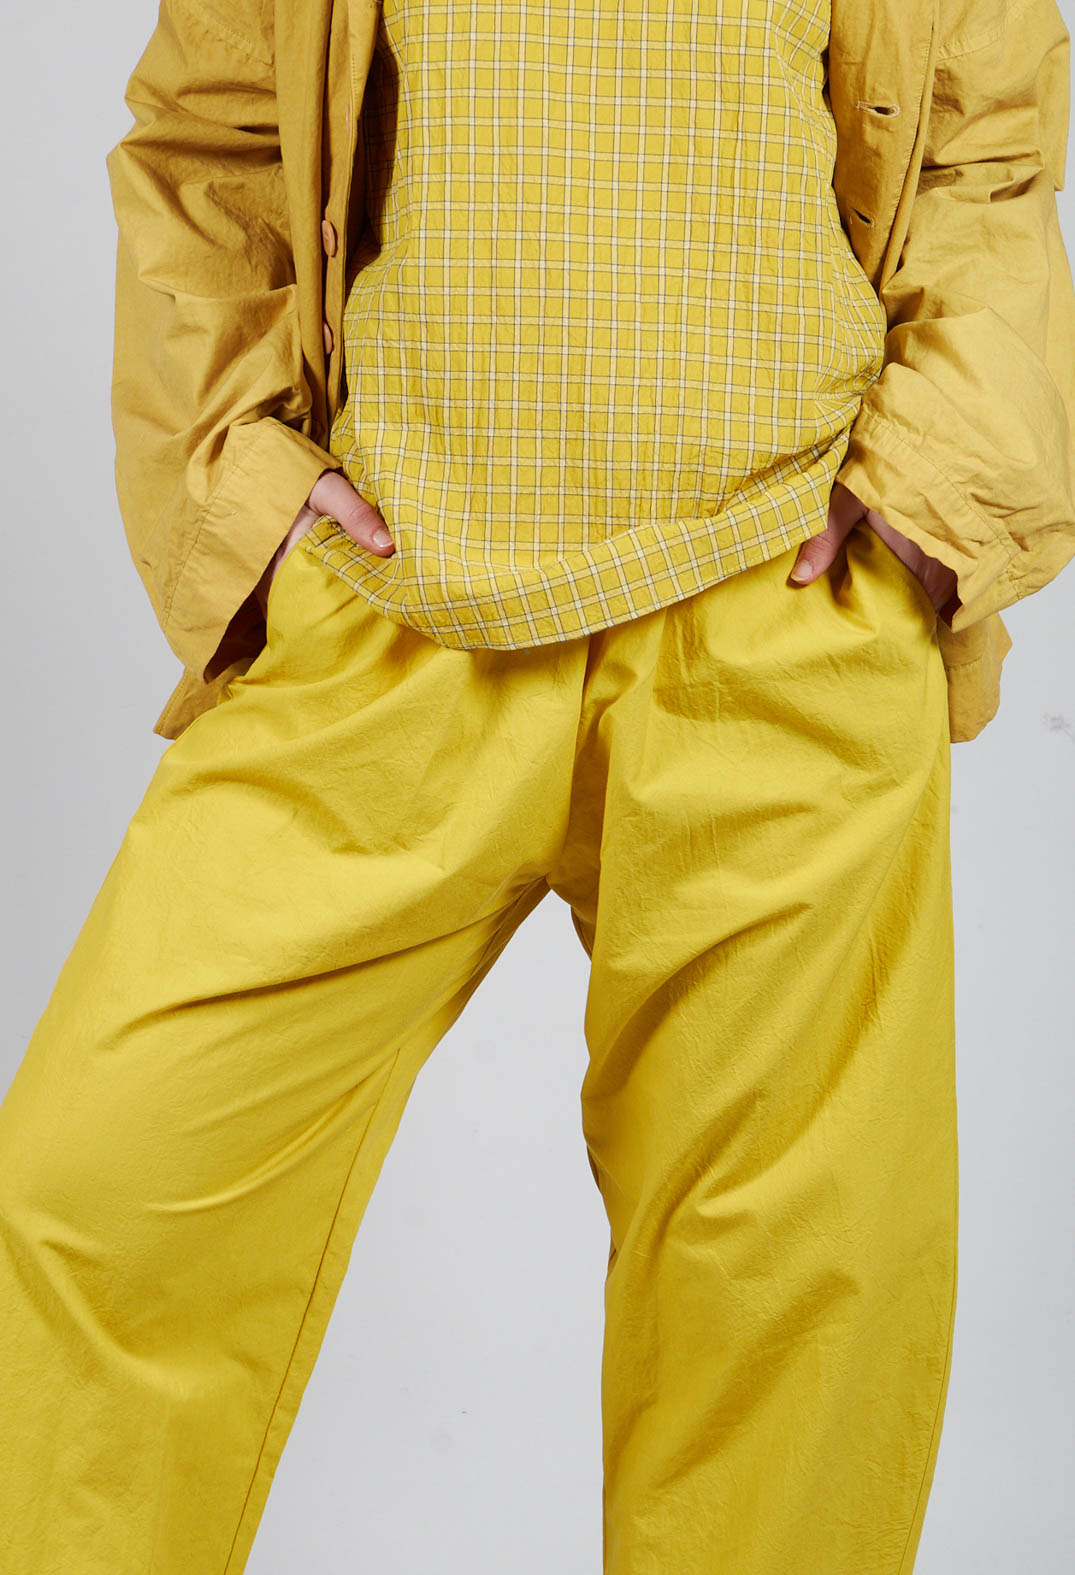 Cropped Trousers in Saffron